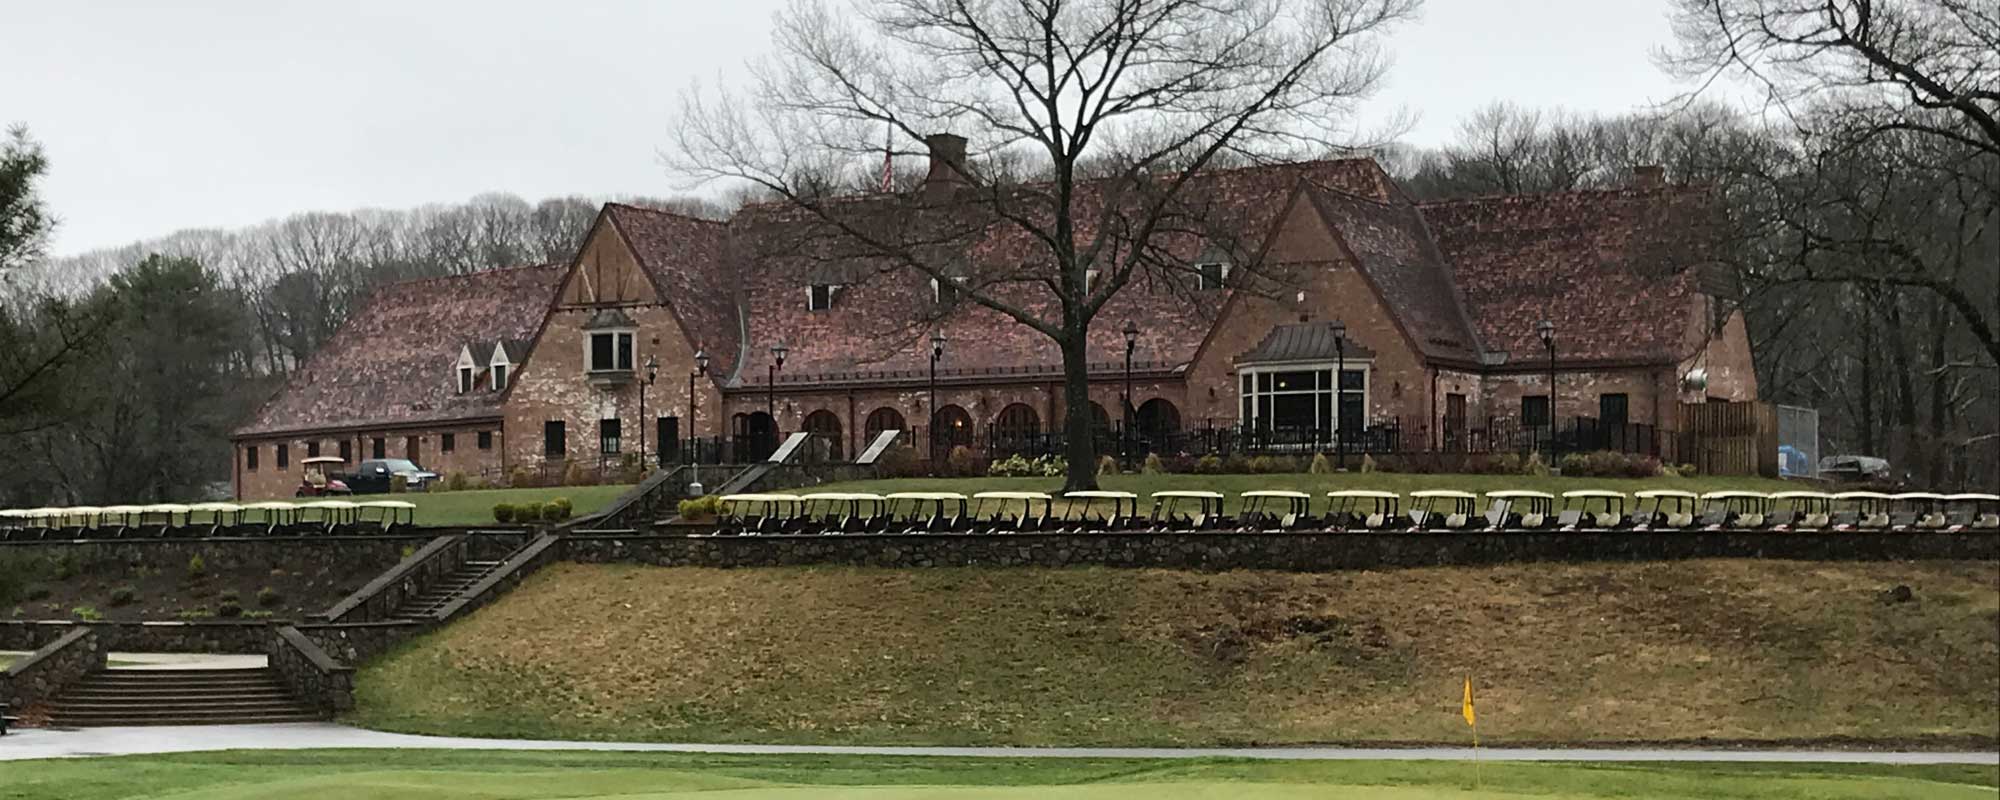 Image for the george wright golf course clubhouse